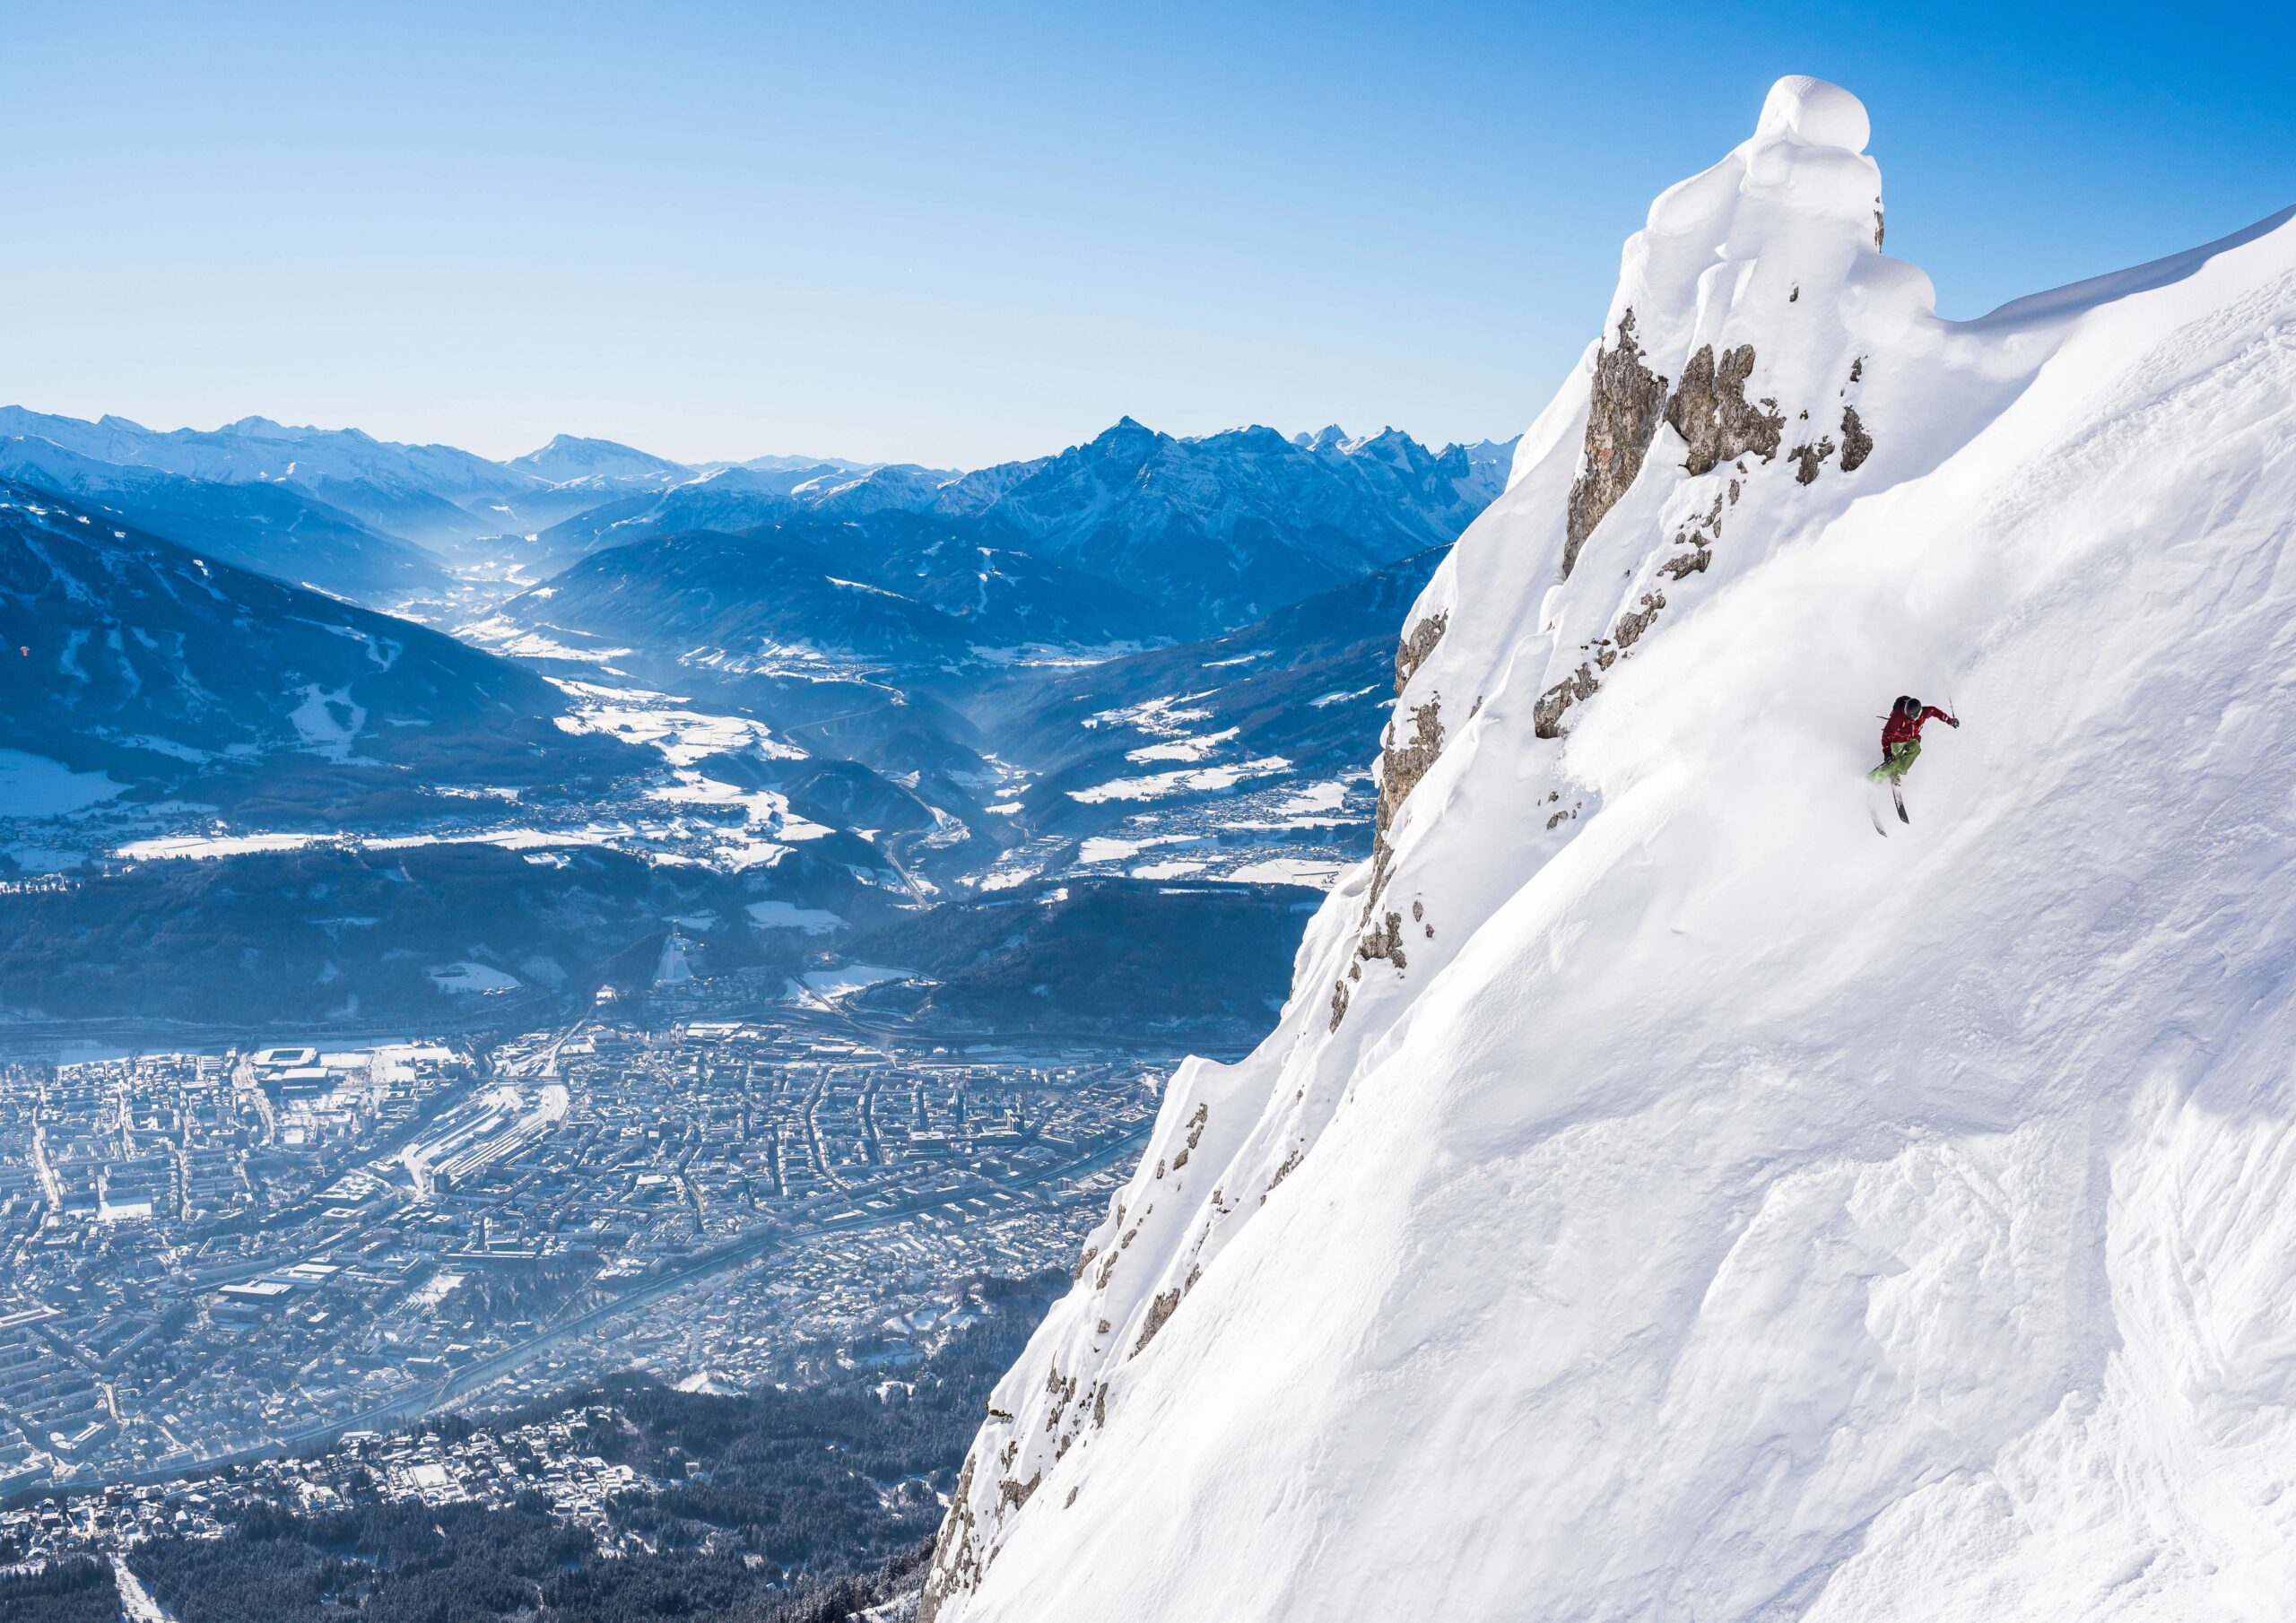 skier is on a very steep face making a turn, with the valley city of Innsbruck below.